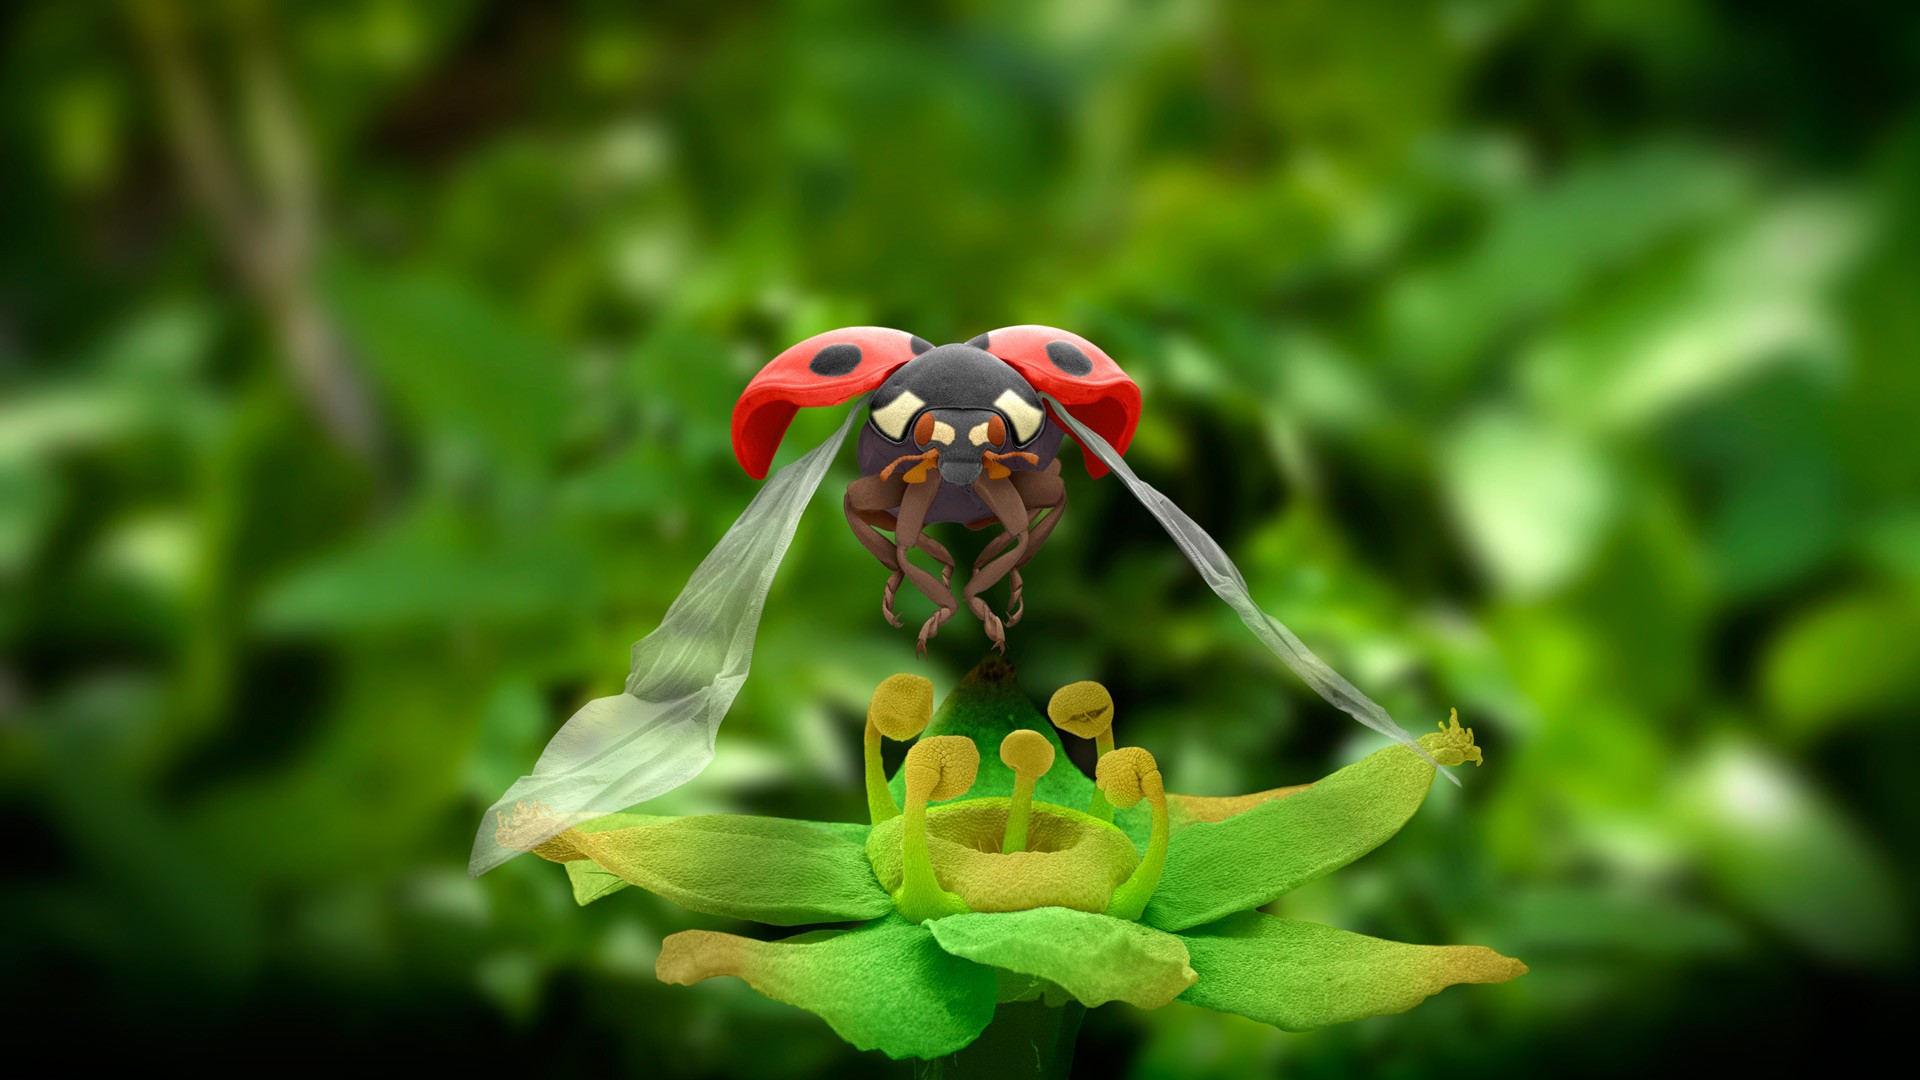 General 1920x1080 nature animals macro ladybugs closeup flying wings insect leaves depth of field plants CGI green background